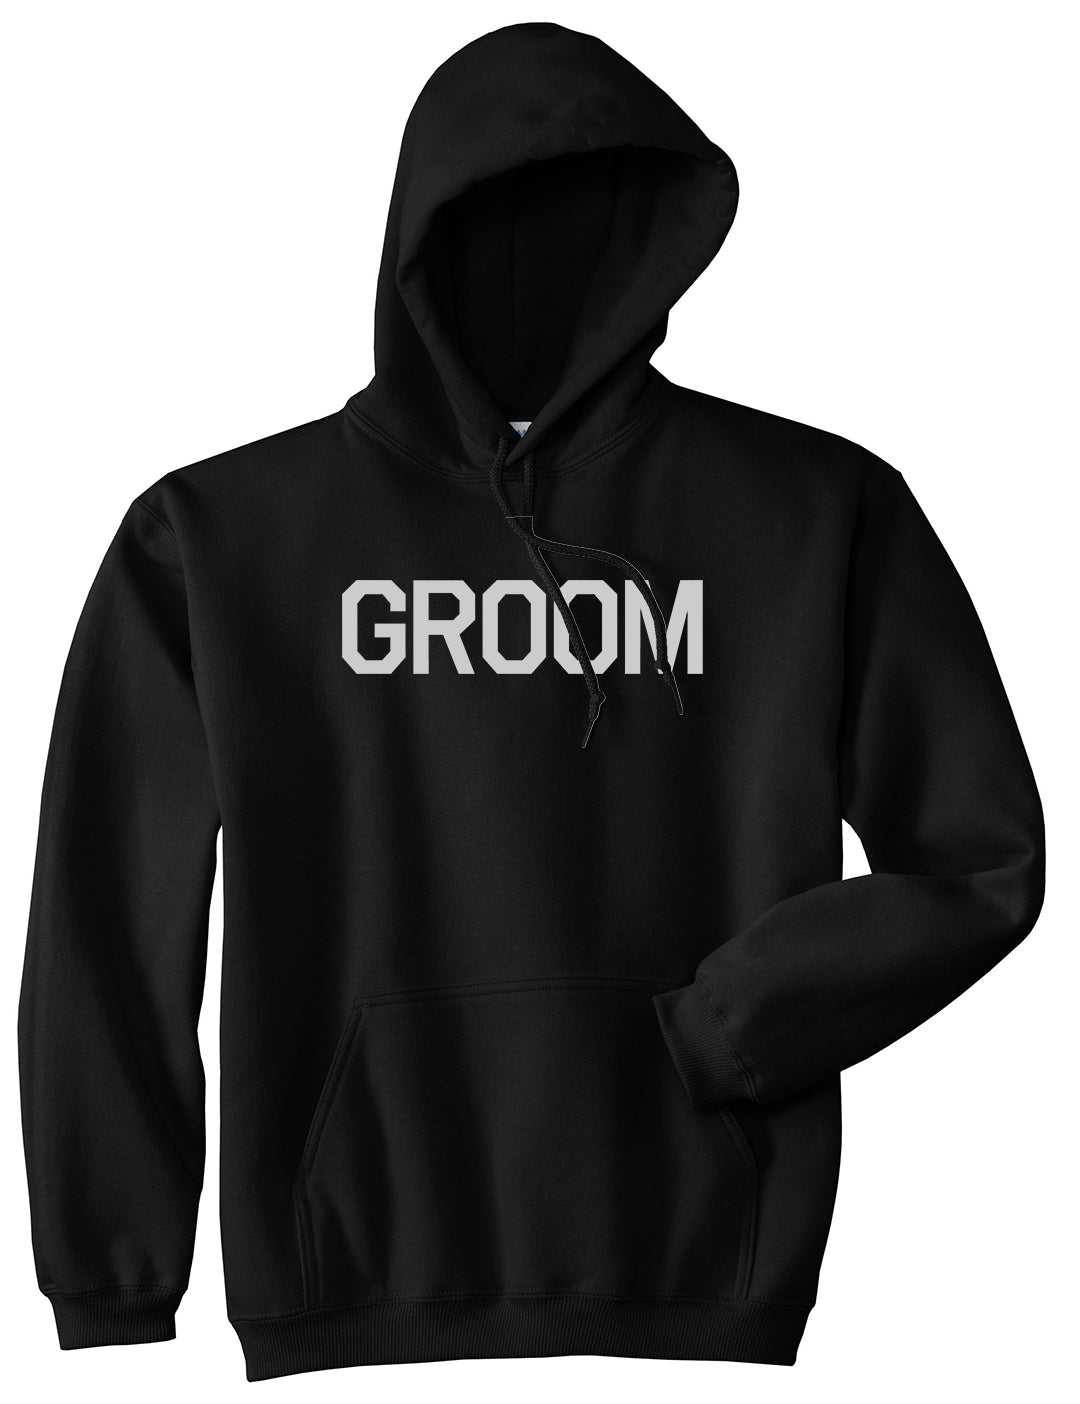 The Groom Bachelor Party Black Pullover Hoodie by Kings Of NY